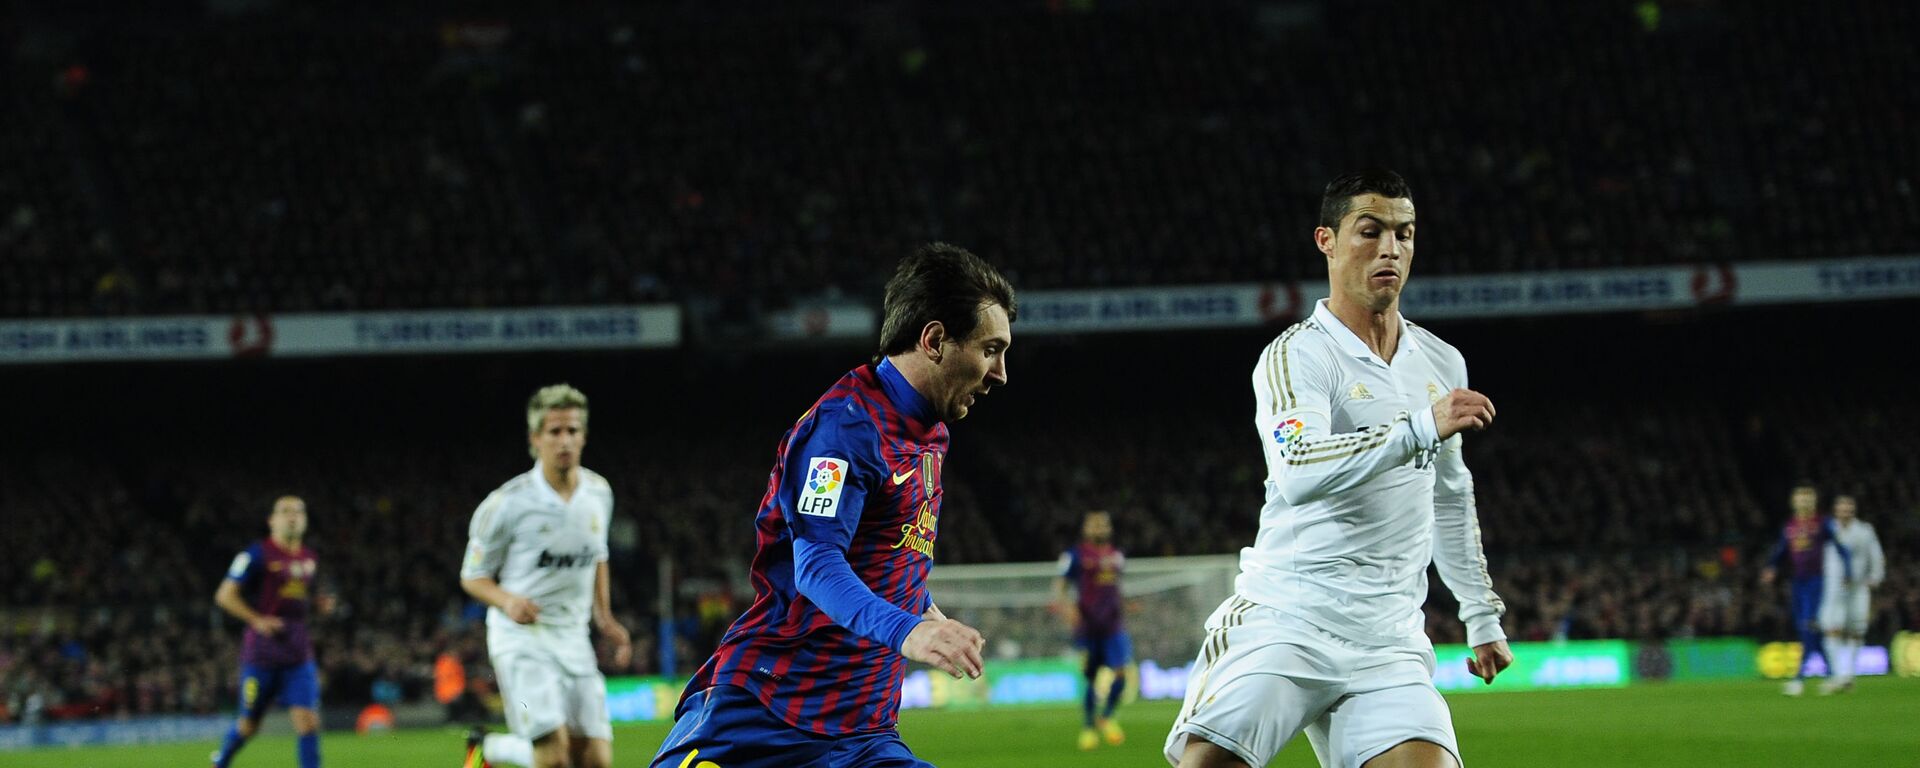 FC Barcelona's Lionel Messi, from Argentina, left, duels for the ball against Real Madrid's Cristiano Ronaldo, from Portugal, during their quarterfinal, second leg, Copa del Rey soccer match at the Camp Nou stadium, in Barcelona, Spain, Wednesday, Jan. 25, 2012 - Sputnik International, 1920, 01.01.2021